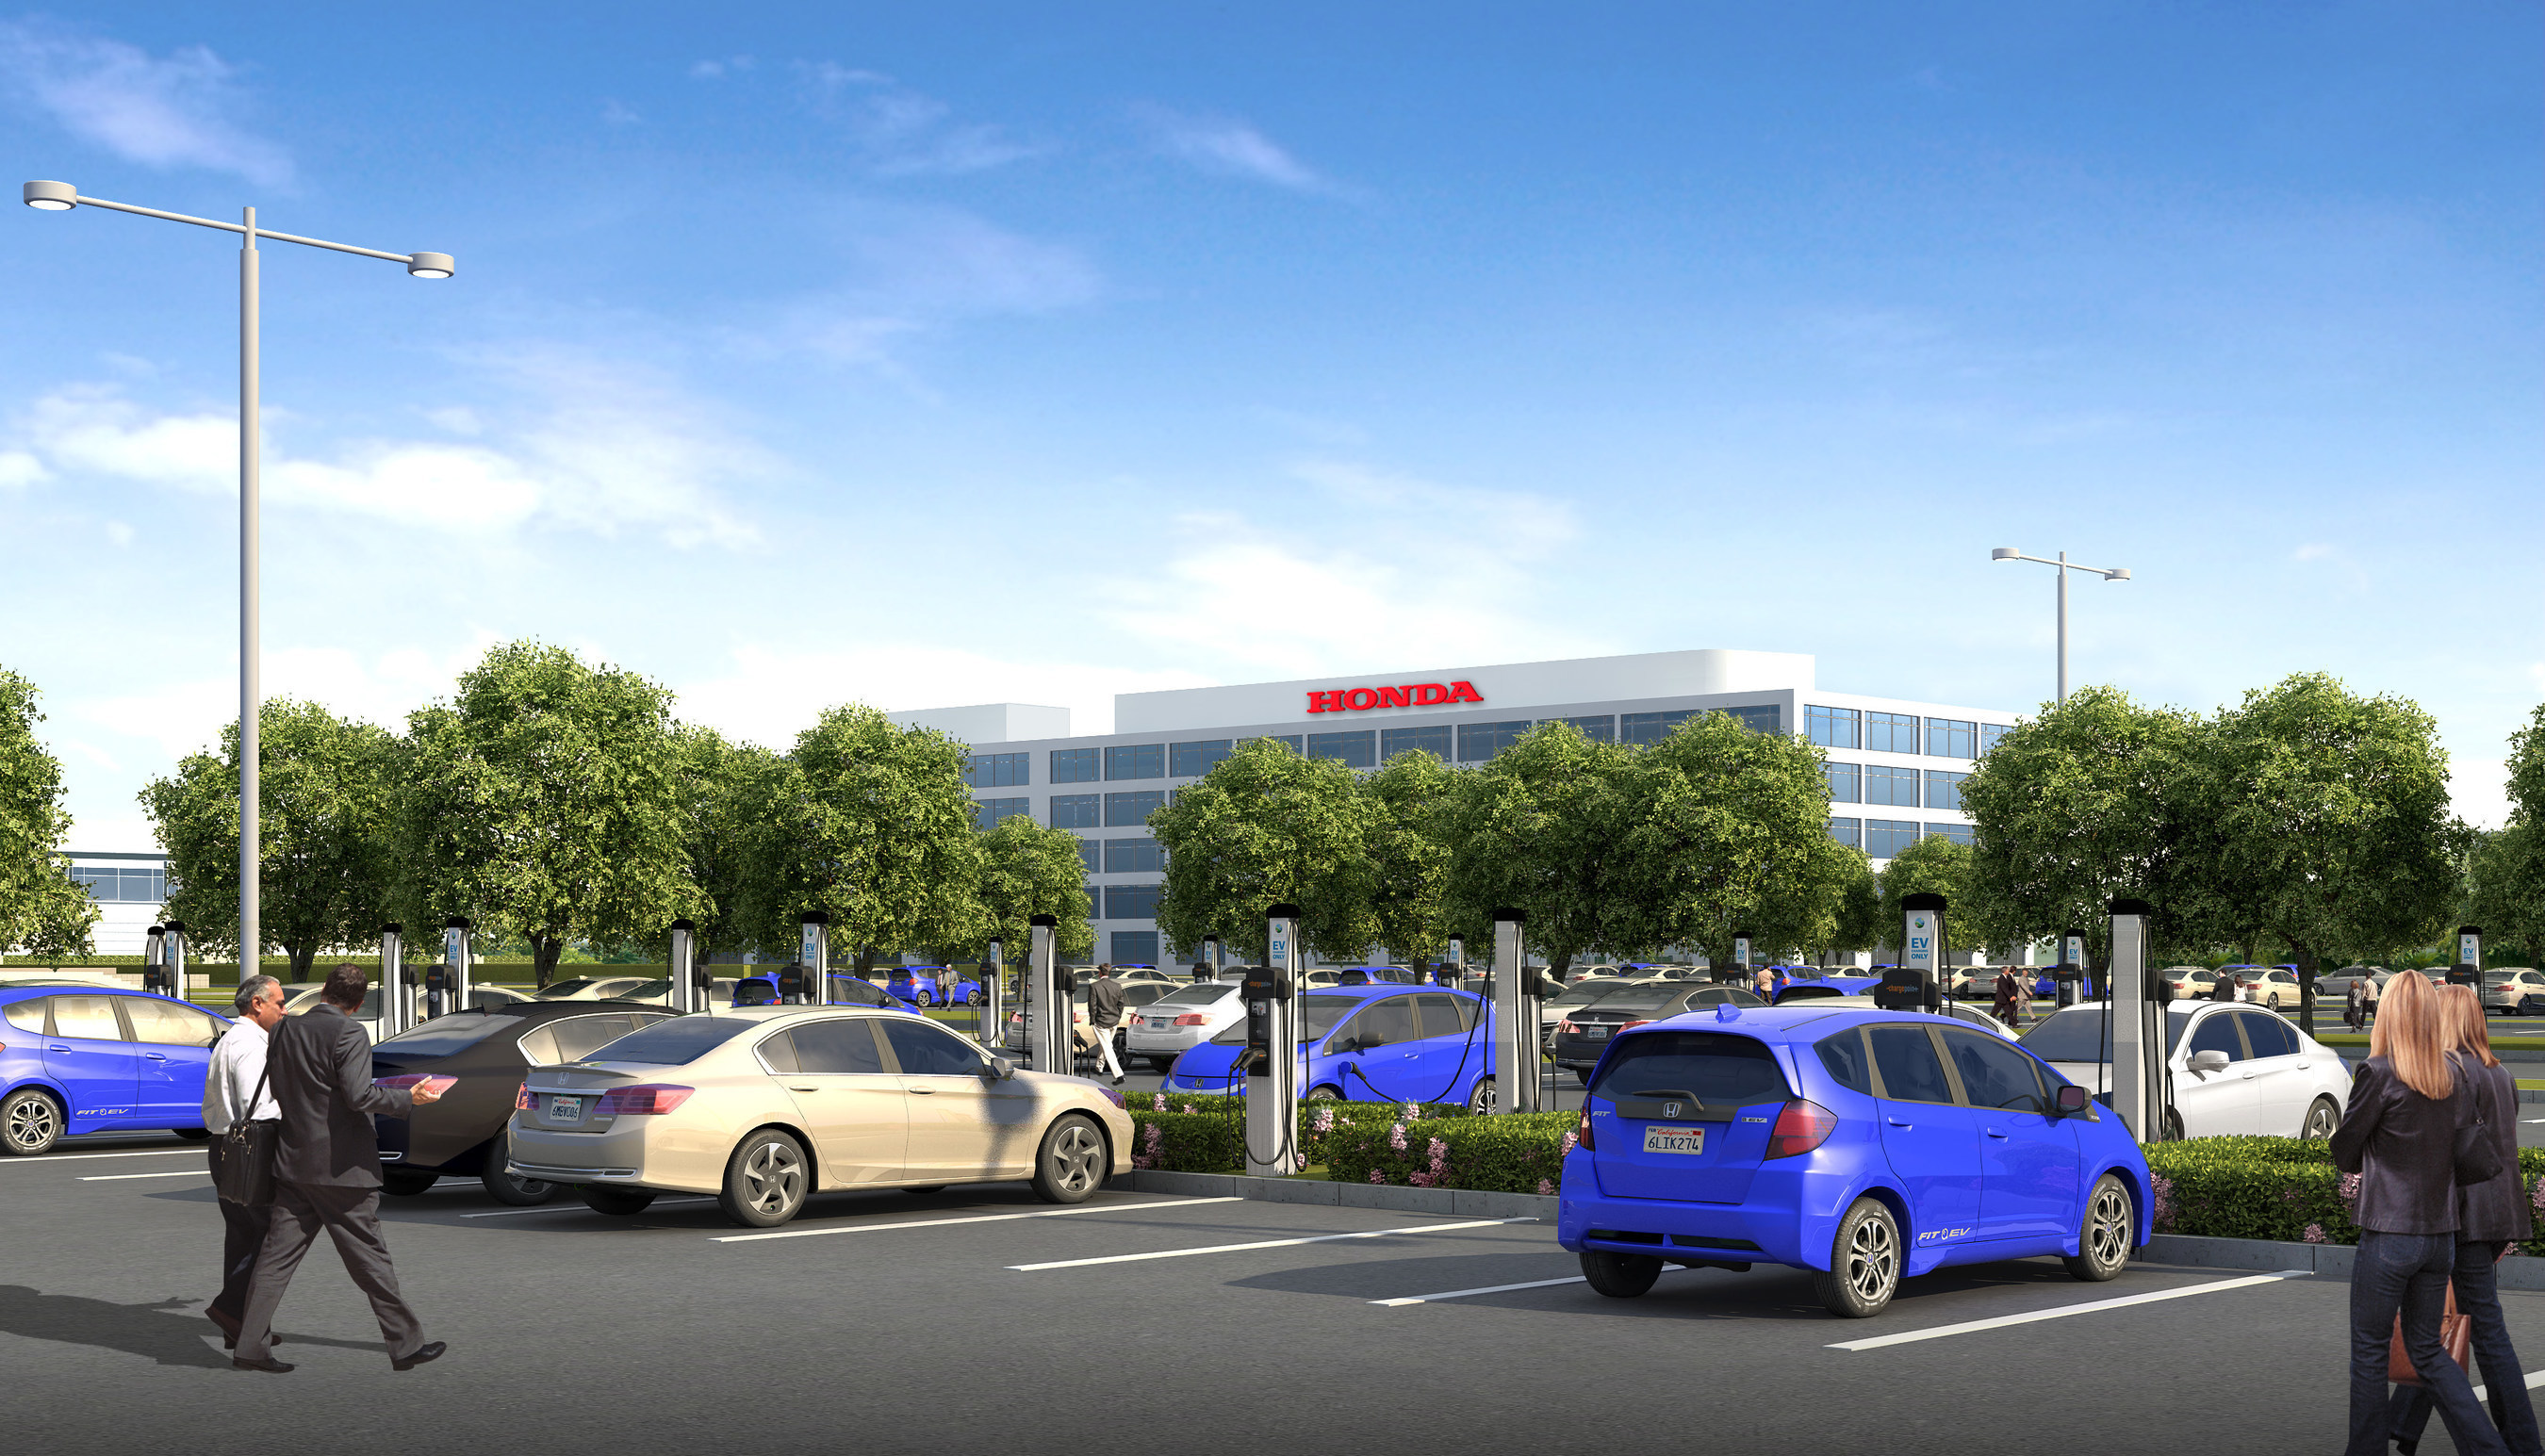 Honda is installing 120 EV chargers at the Torrance, CA headquarters of American Honda.